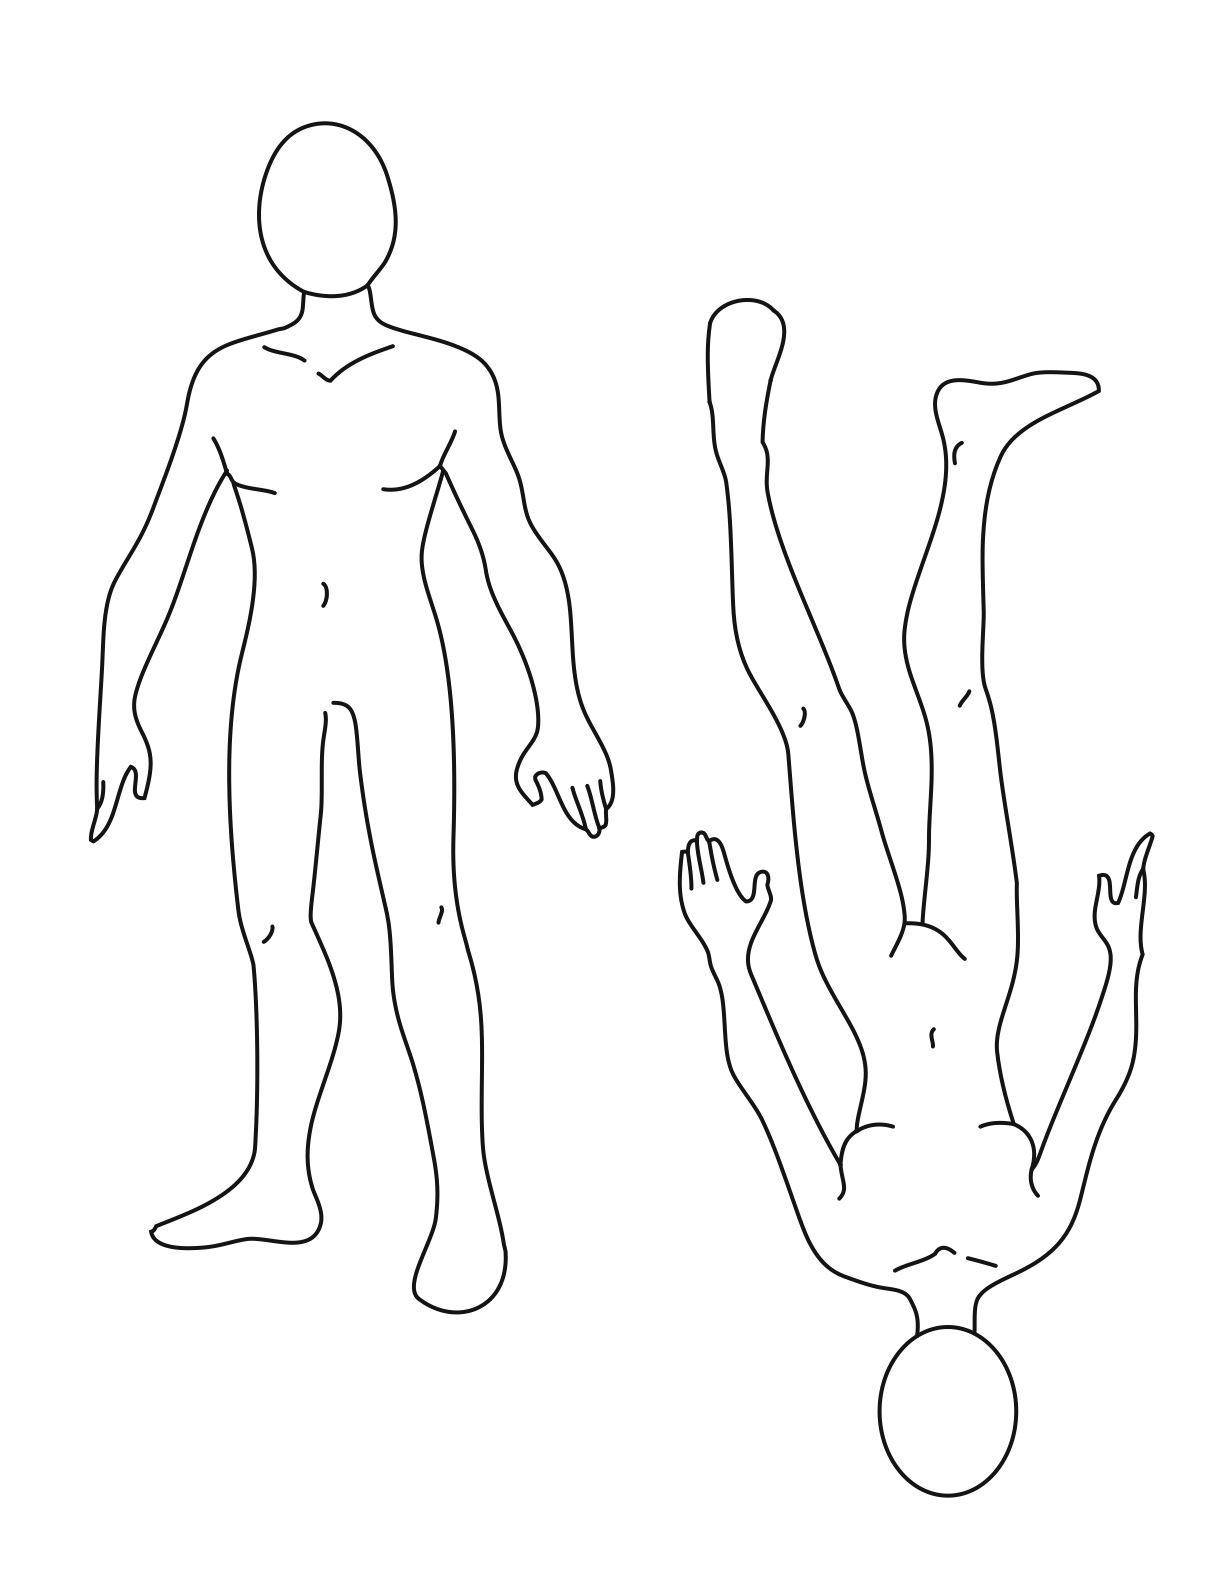 Male body Drawing References and Sketches for Artists